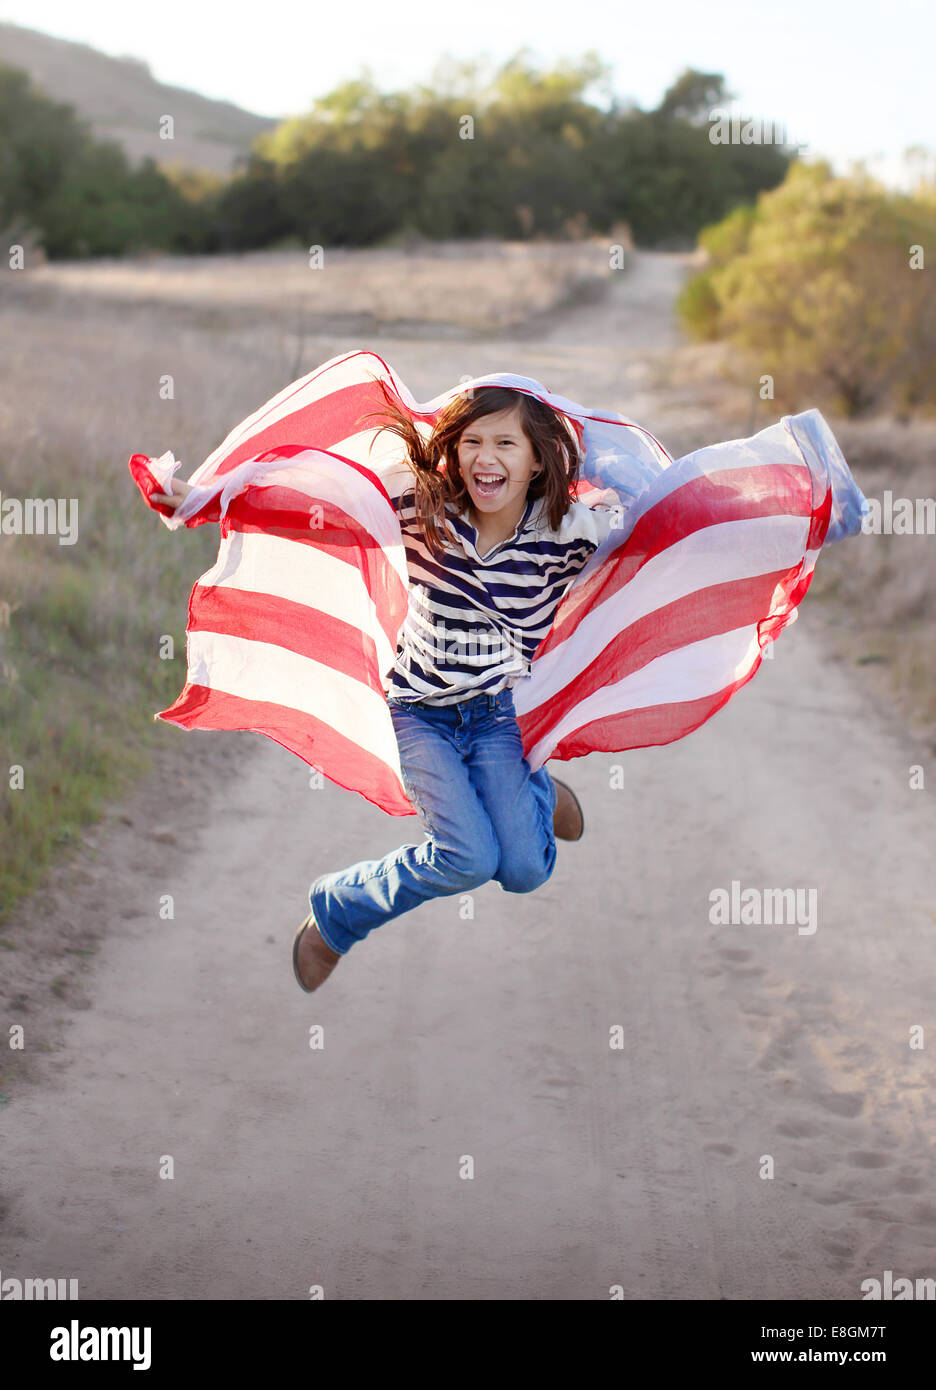 Girl jumping in the air holding American flag Stock Photo